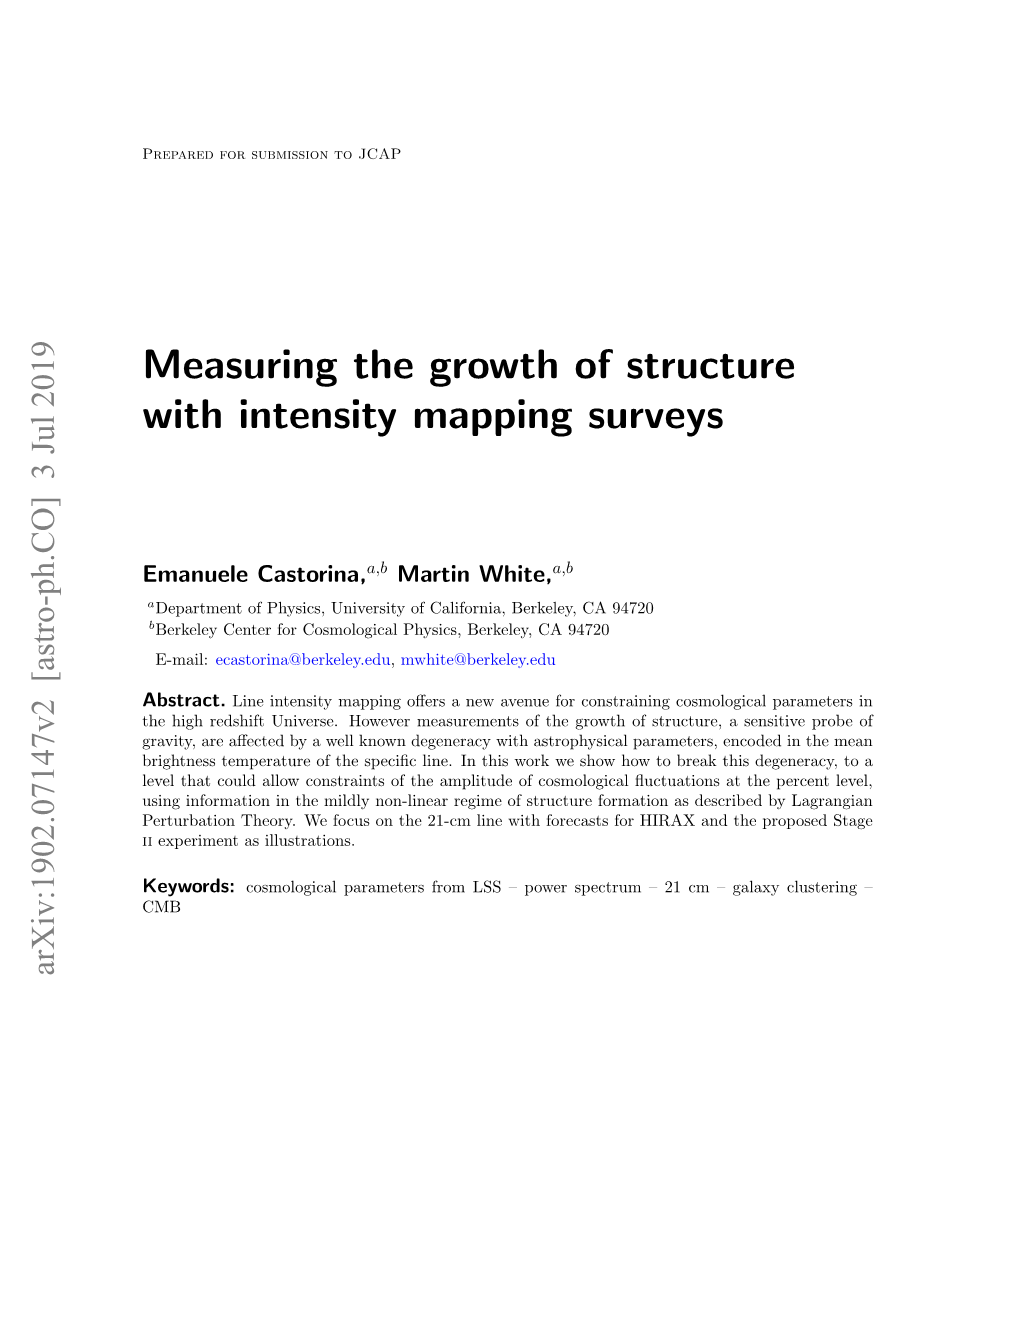 Measuring the Growth of Structure with Intensity Mapping Surveys